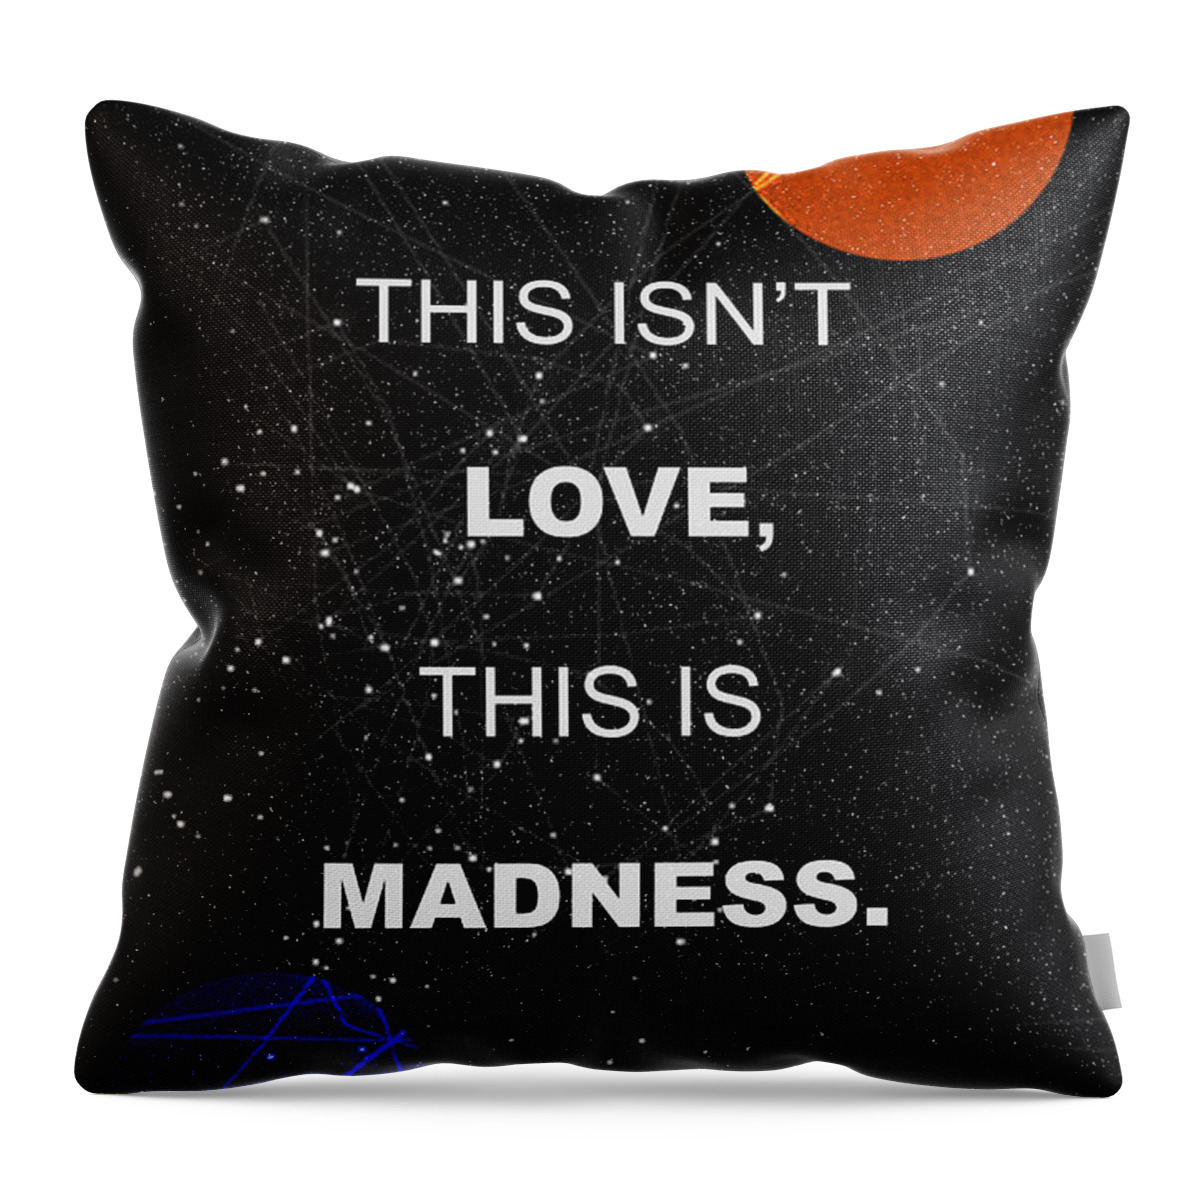 Space Poster Throw Pillow featuring the painting This Isnt Love This Is Madness Space Poster by IamLoudness Studio